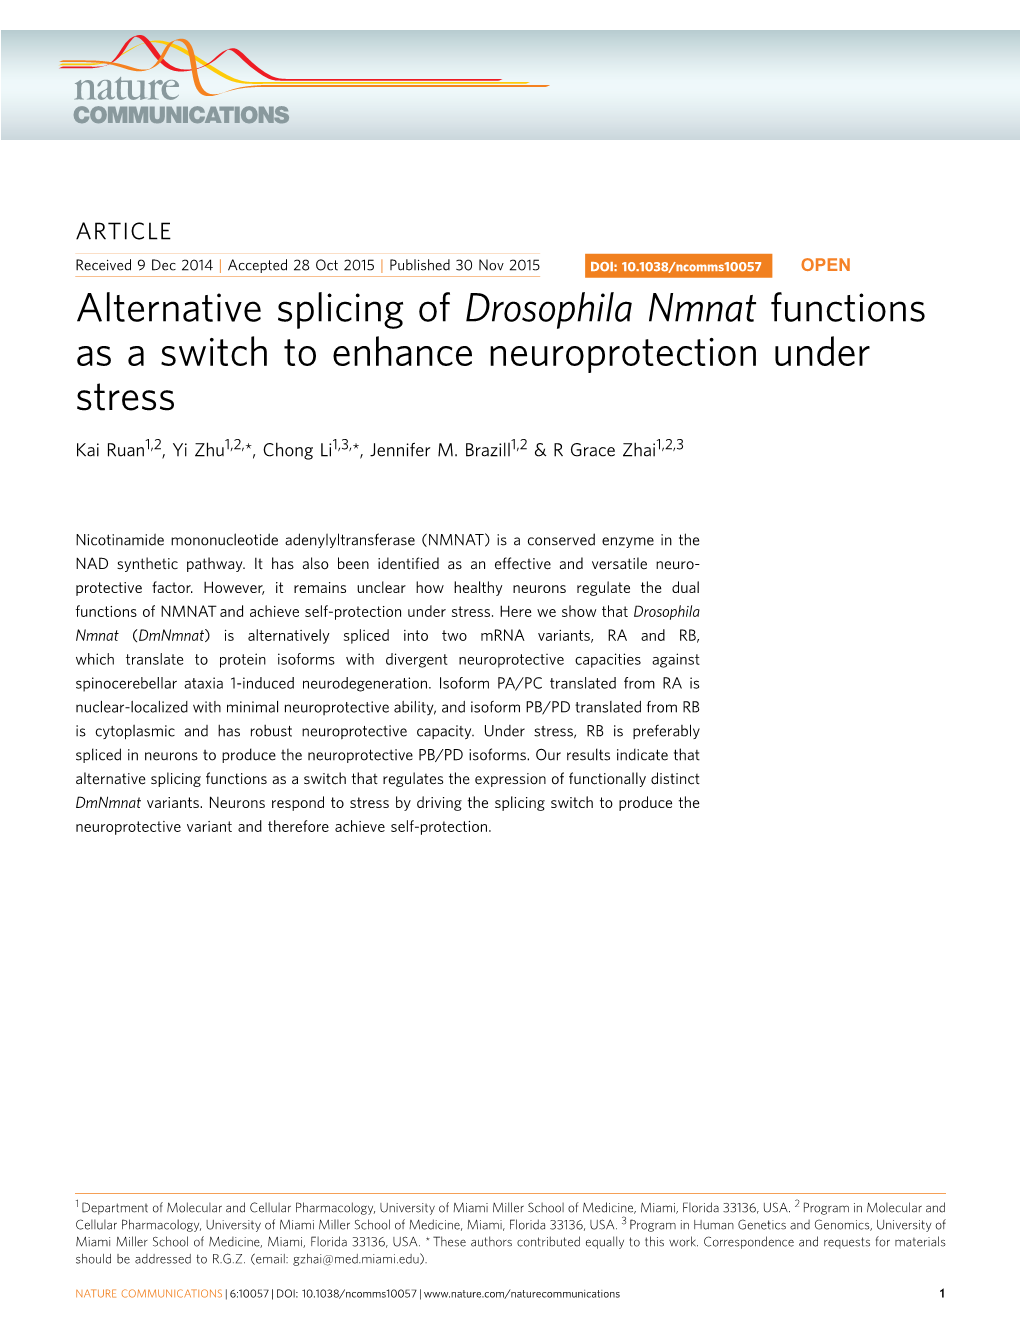 Alternative Splicing of Drosophila Nmnat Functions As a Switch to Enhance Neuroprotection Under Stress